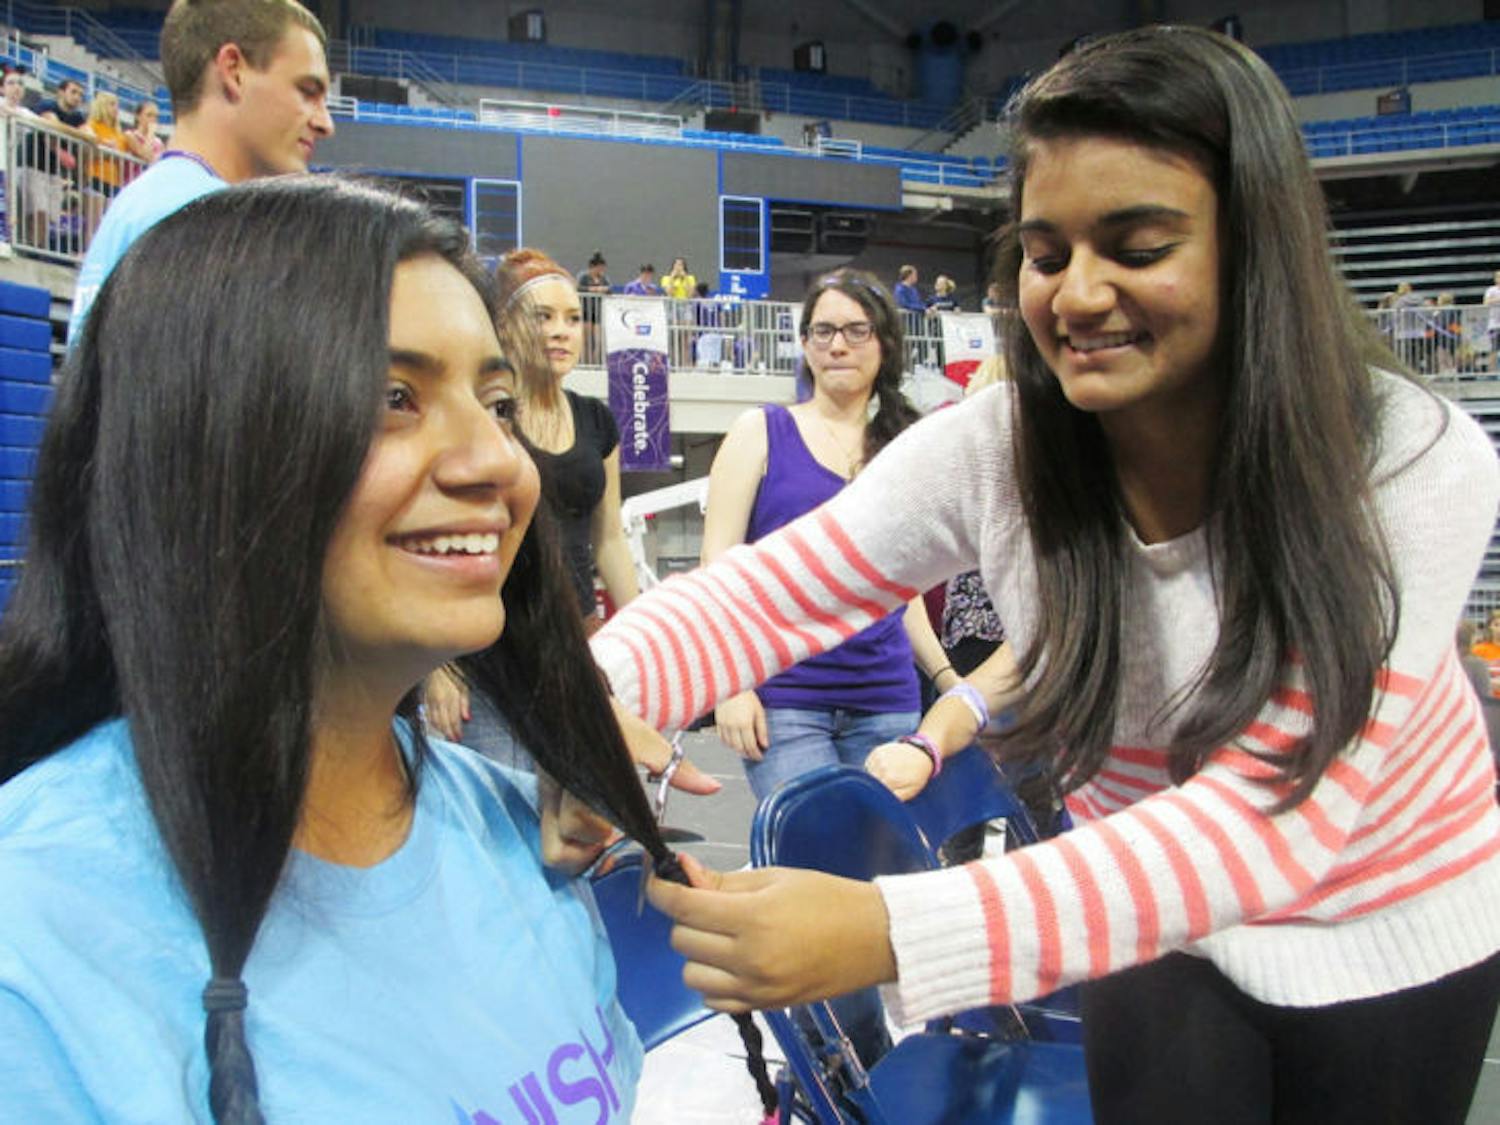 Aishwarya Potdar, a 21-year-old applied physiology and kinesiology junior, gets her hair cut by her 15-year-old sister, Amruta Potdar, for Relay for Life. The event was held Friday night through Saturday morning in the Stephen C. O’Connell Center.